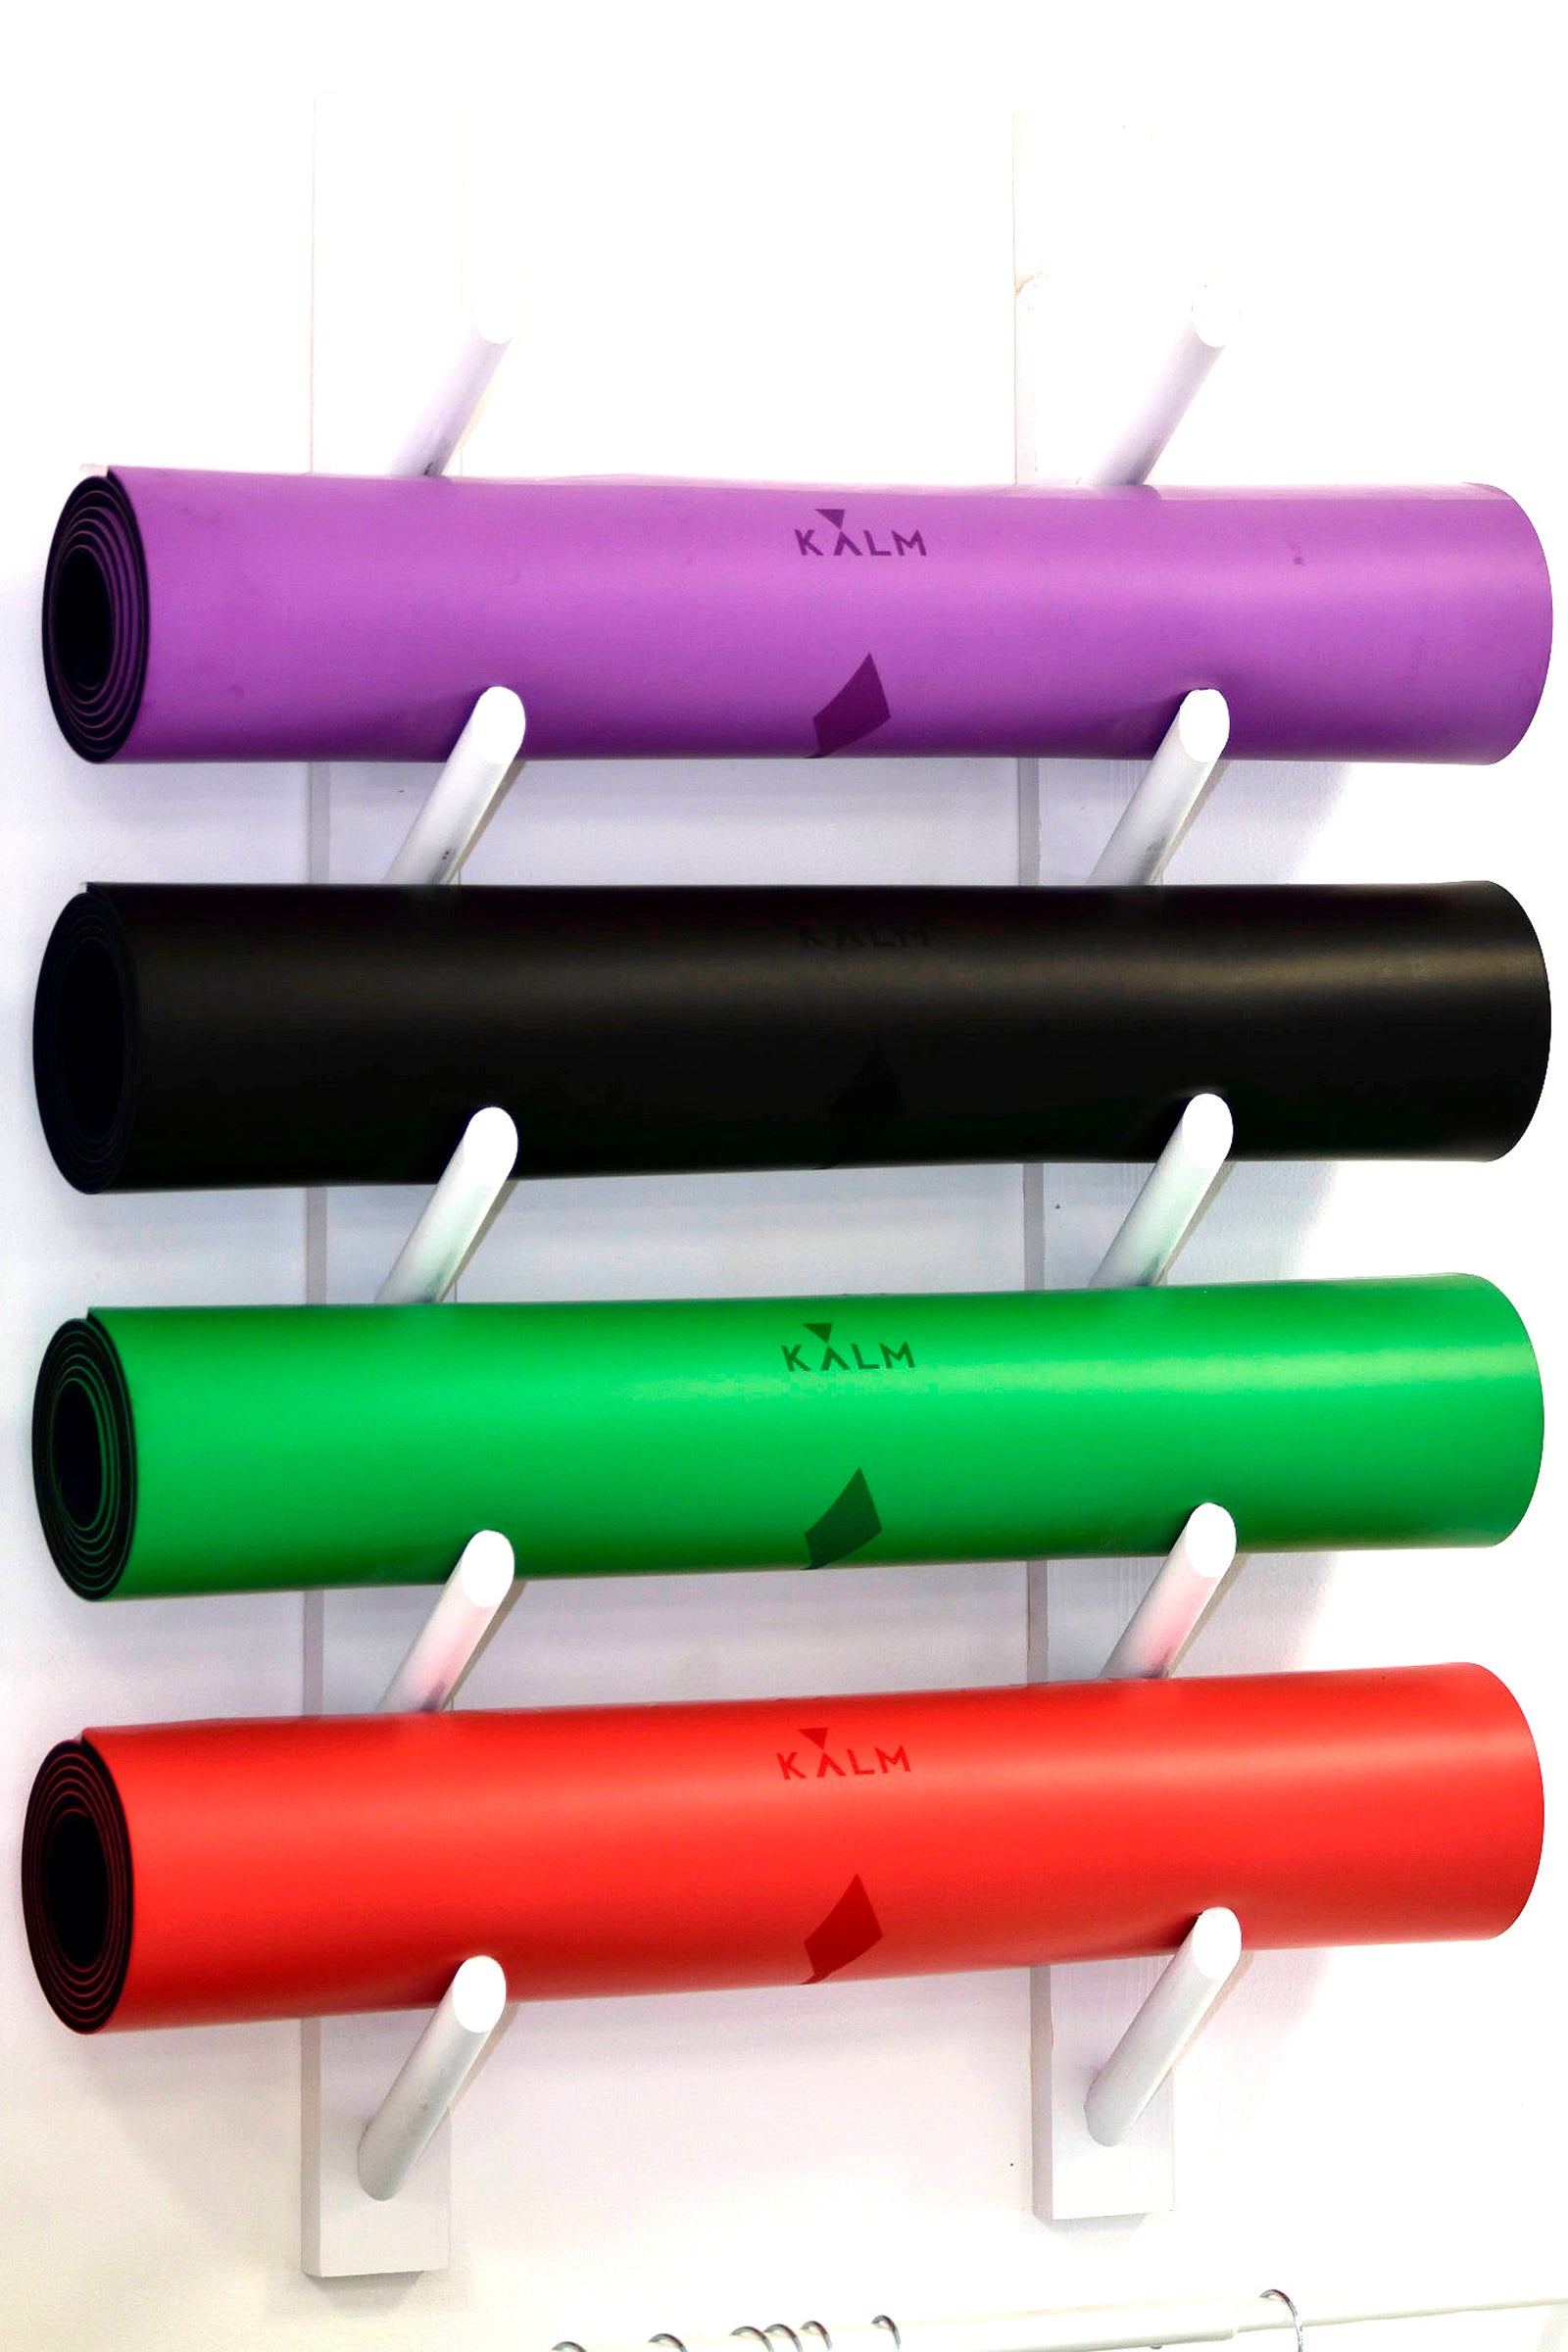 KALM Manifest Yoga Mat Eco-Friendly made with Natural Rubber for Best Grip and Excellent Support. Dark Purple